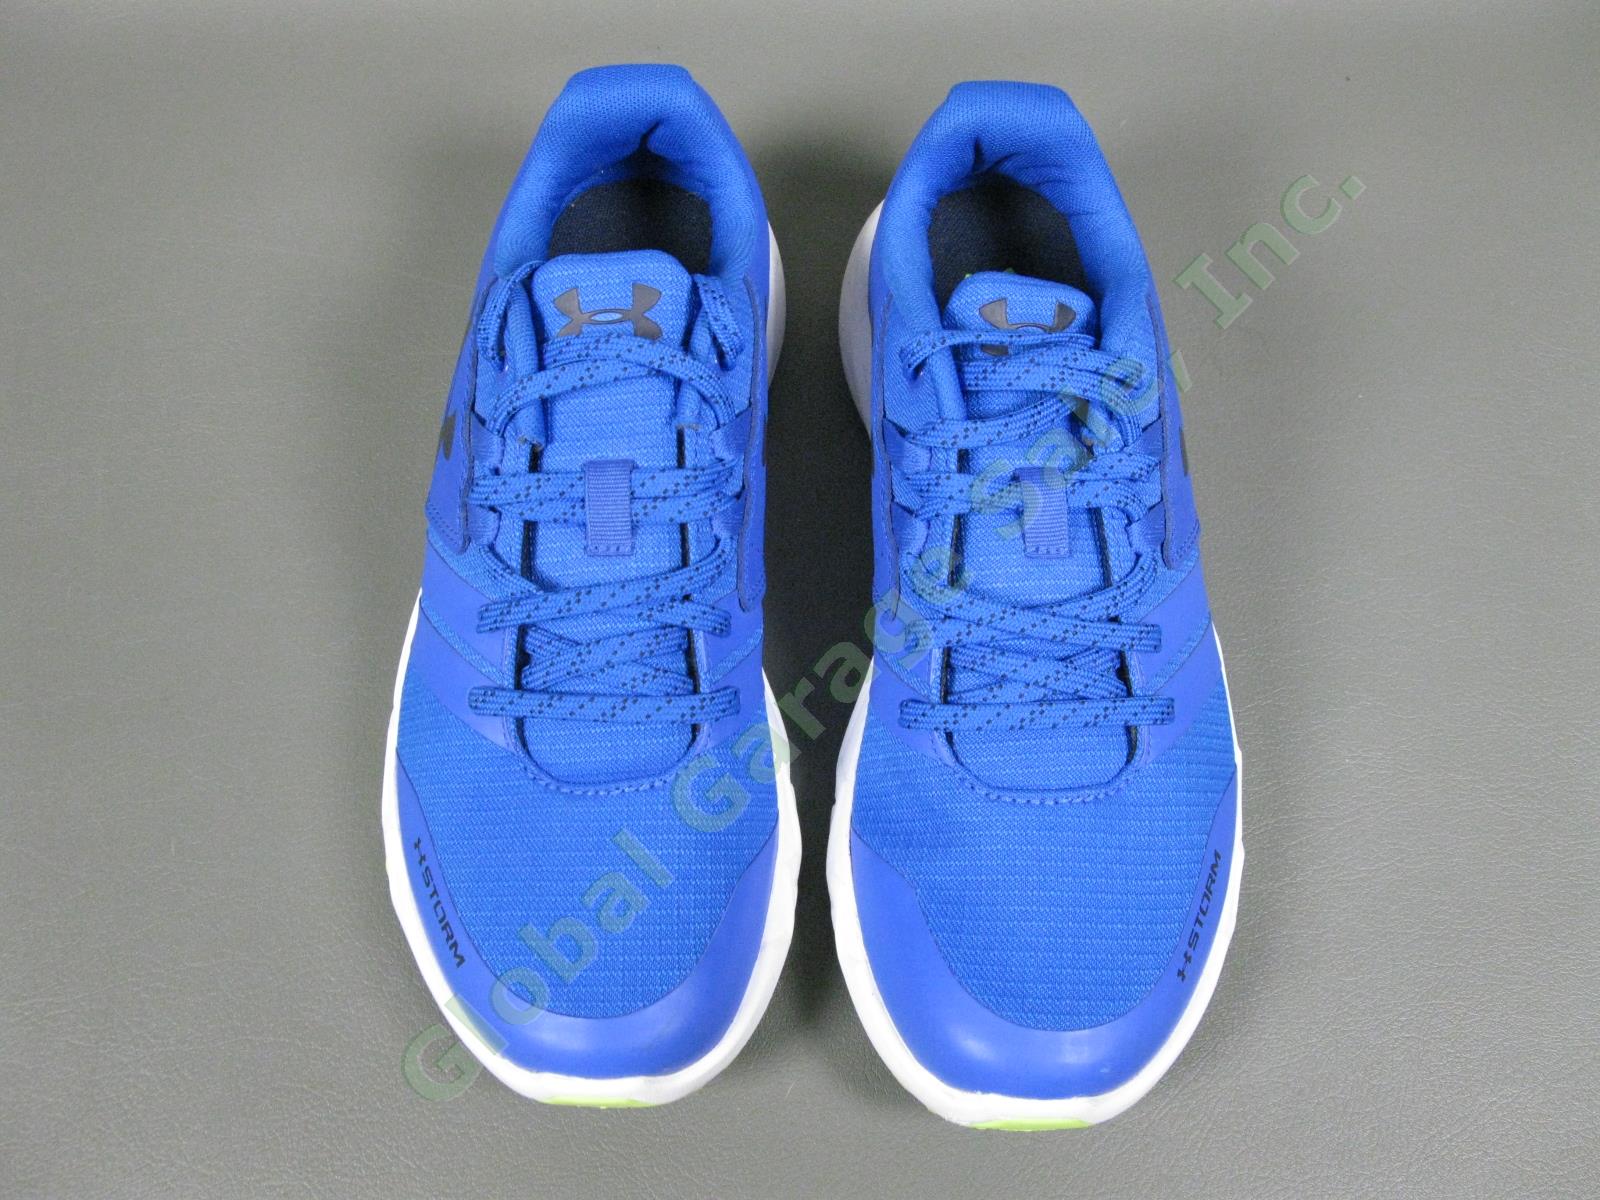 Under Armour Storm Blue Running Sneaker Pair Youth-6 Kids Shoes Fits Womens-7 2